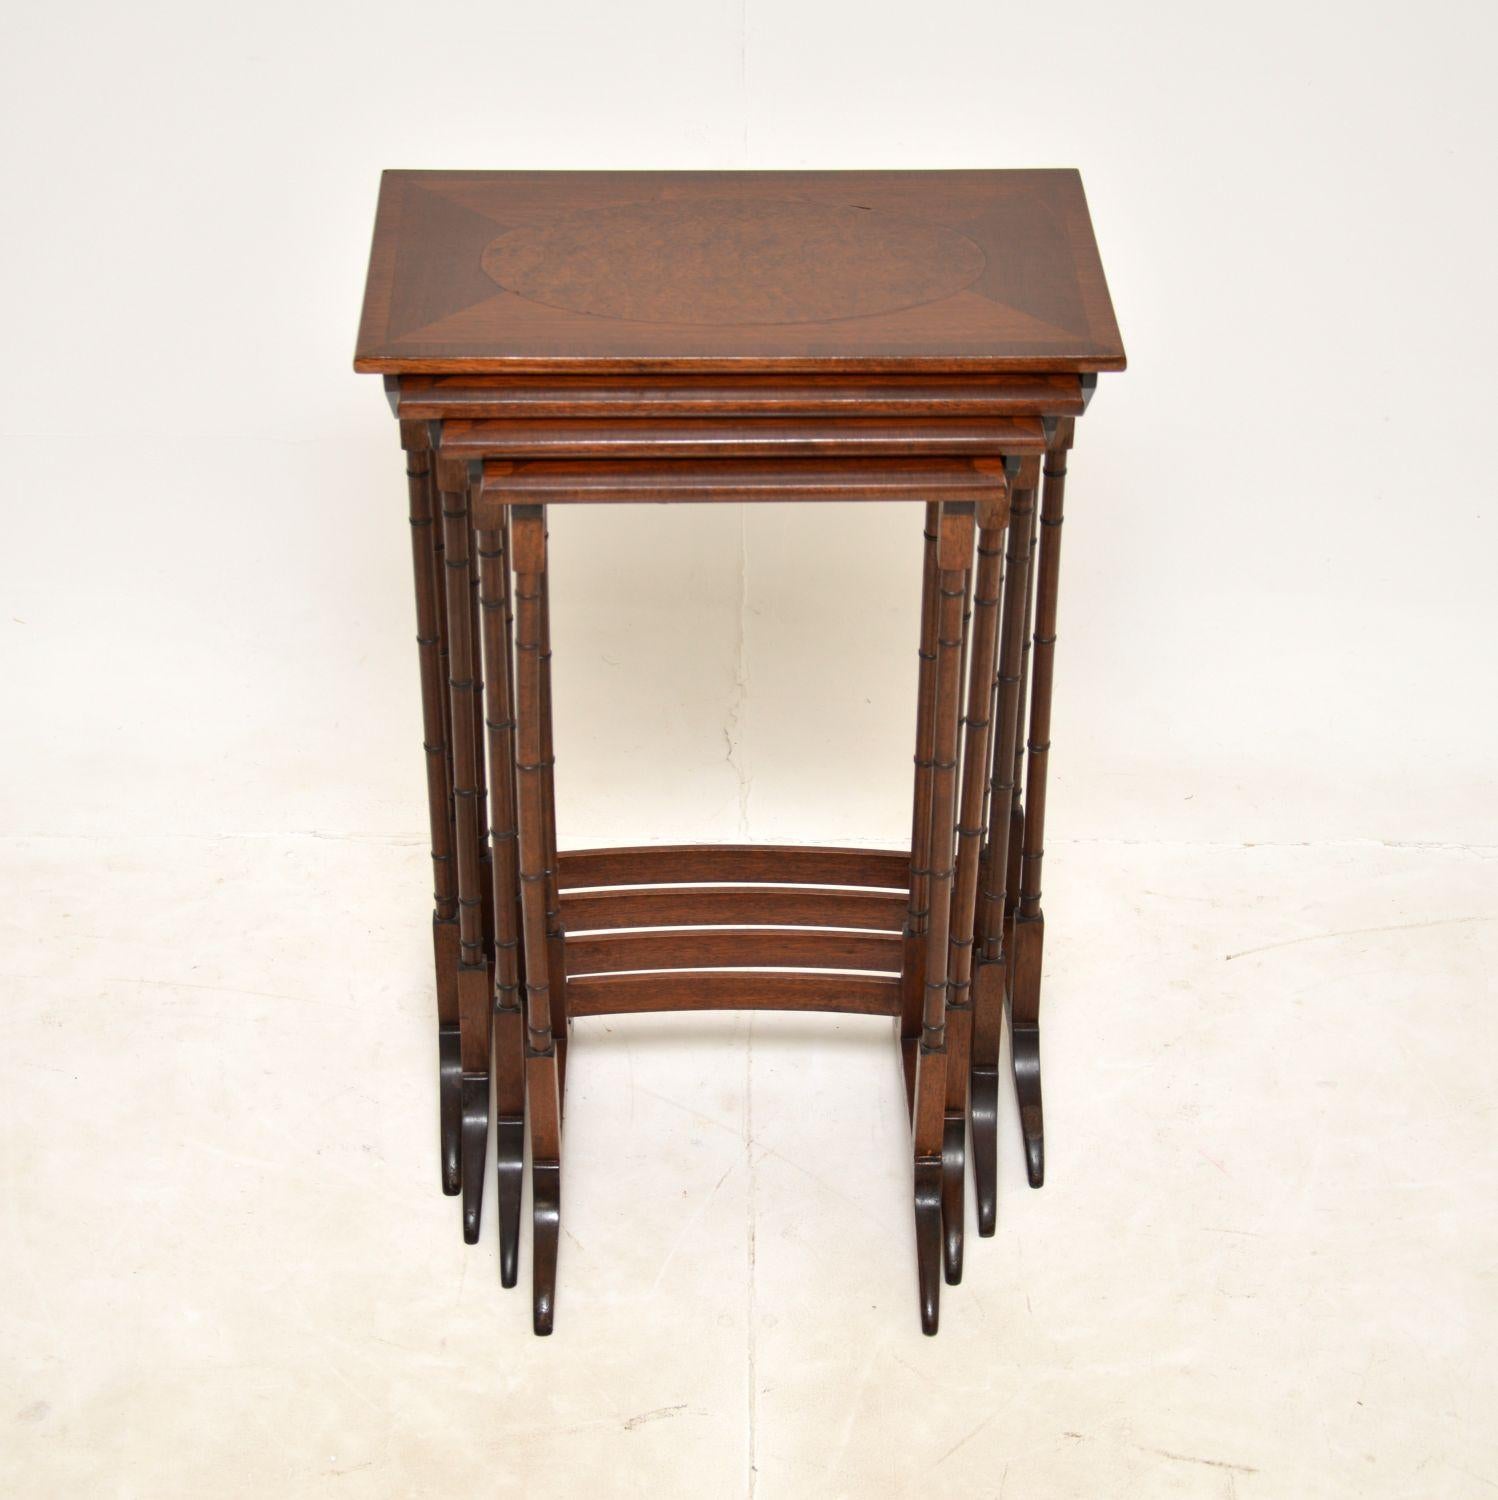 A smart and very well made nest of four tables in walnut. They were made in England, and date from around the 1930’s.

They are of superb quality, with beautifully turned legs, stretchered bases and beautifully veneered tops of burr walnut.

The